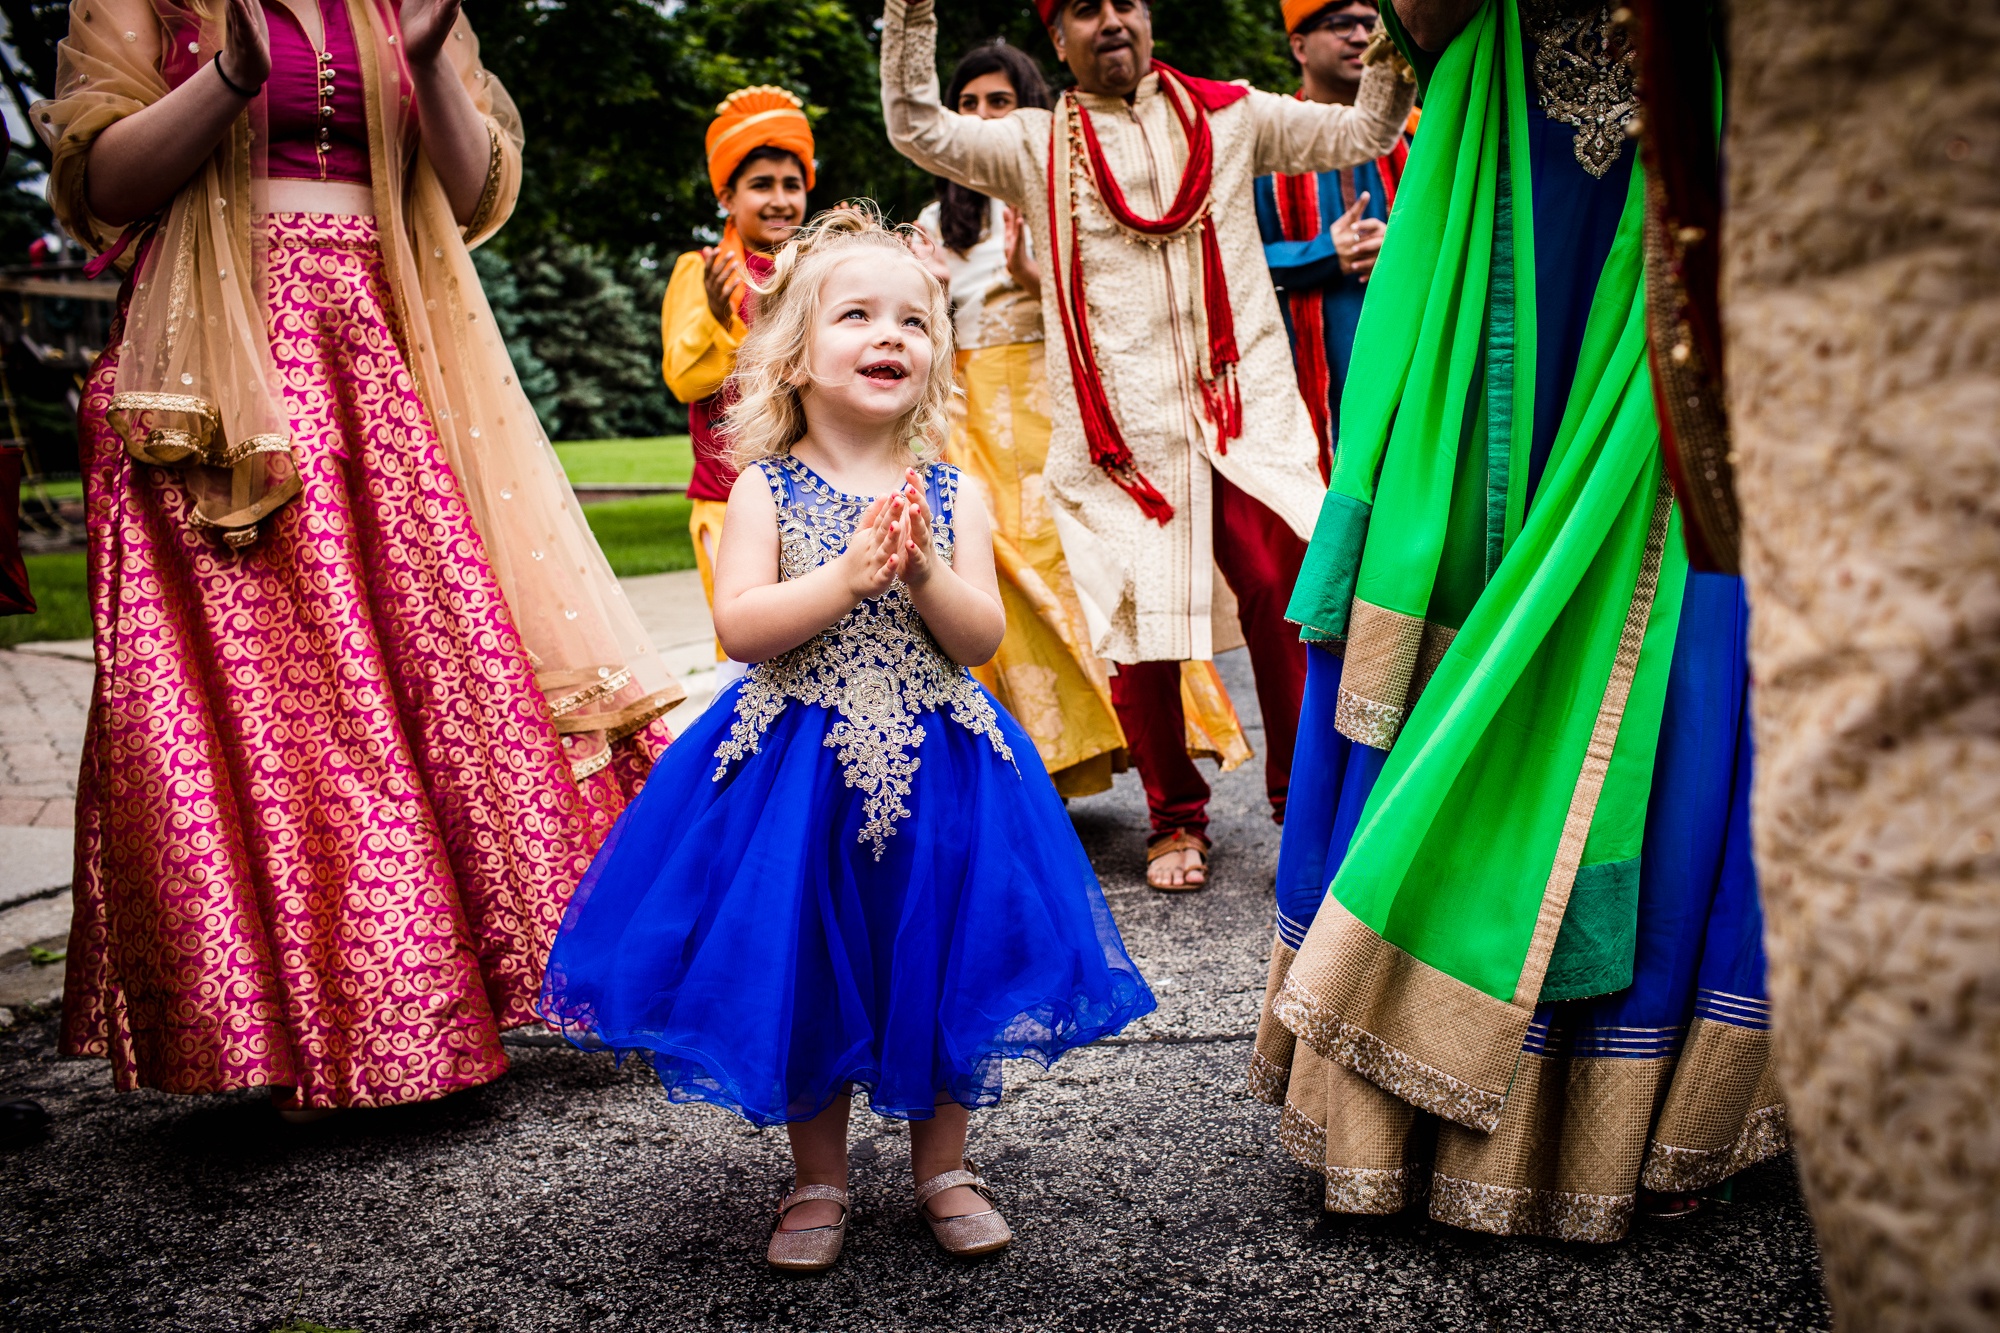 Guests dance at a baraat during an Aurora Balaji Temple wedding ceremony